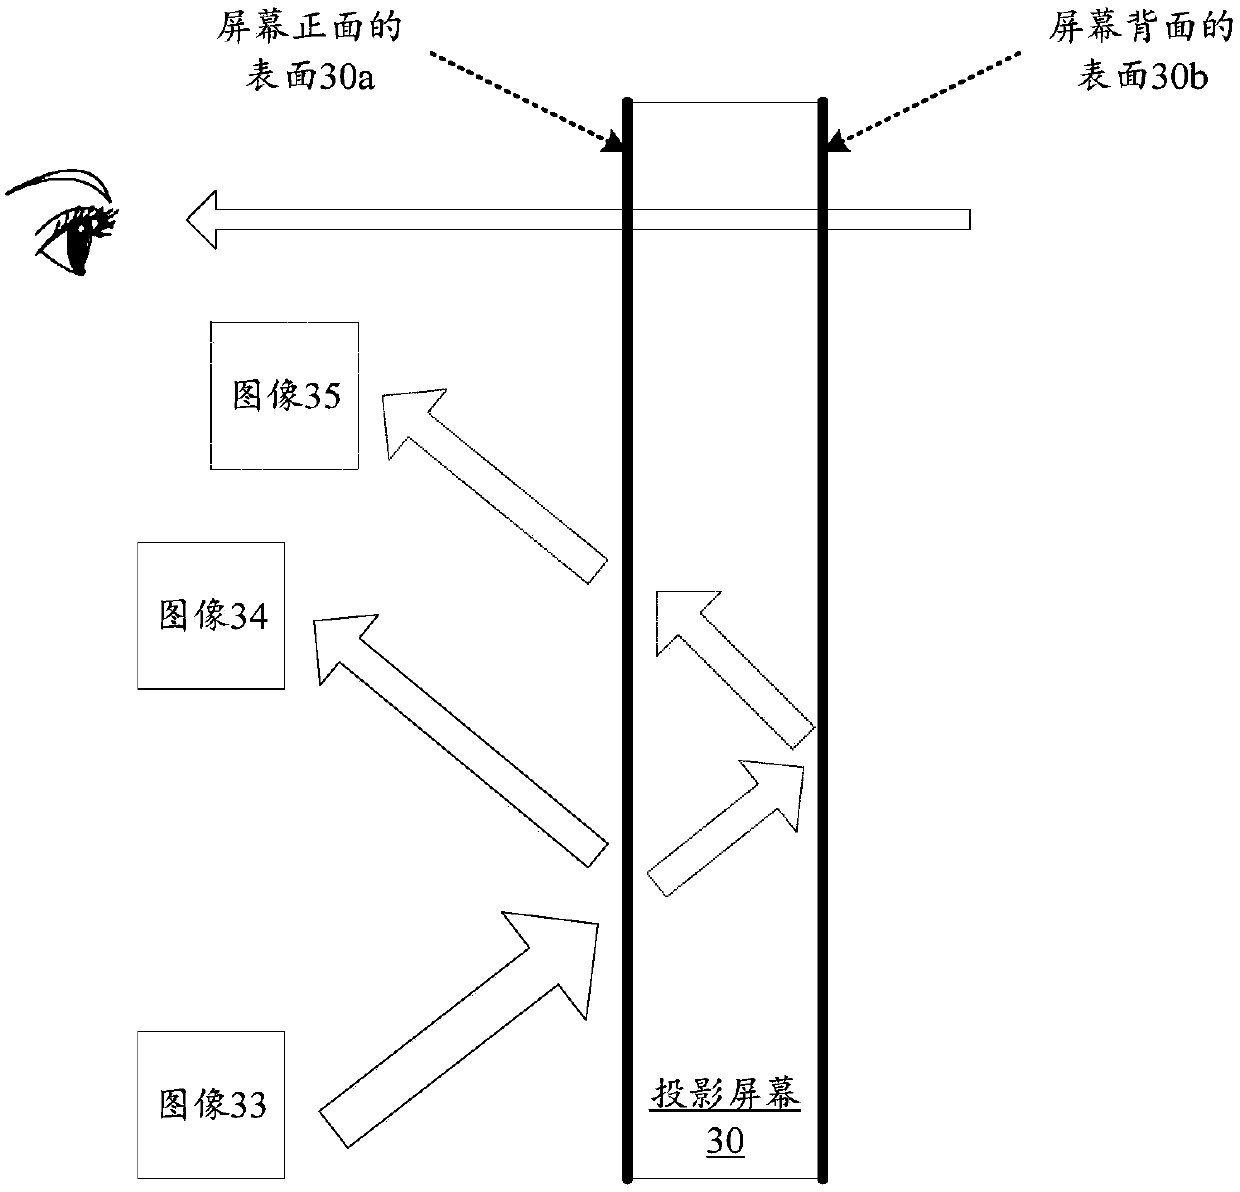 Projection screen and projection system for double-sided projection